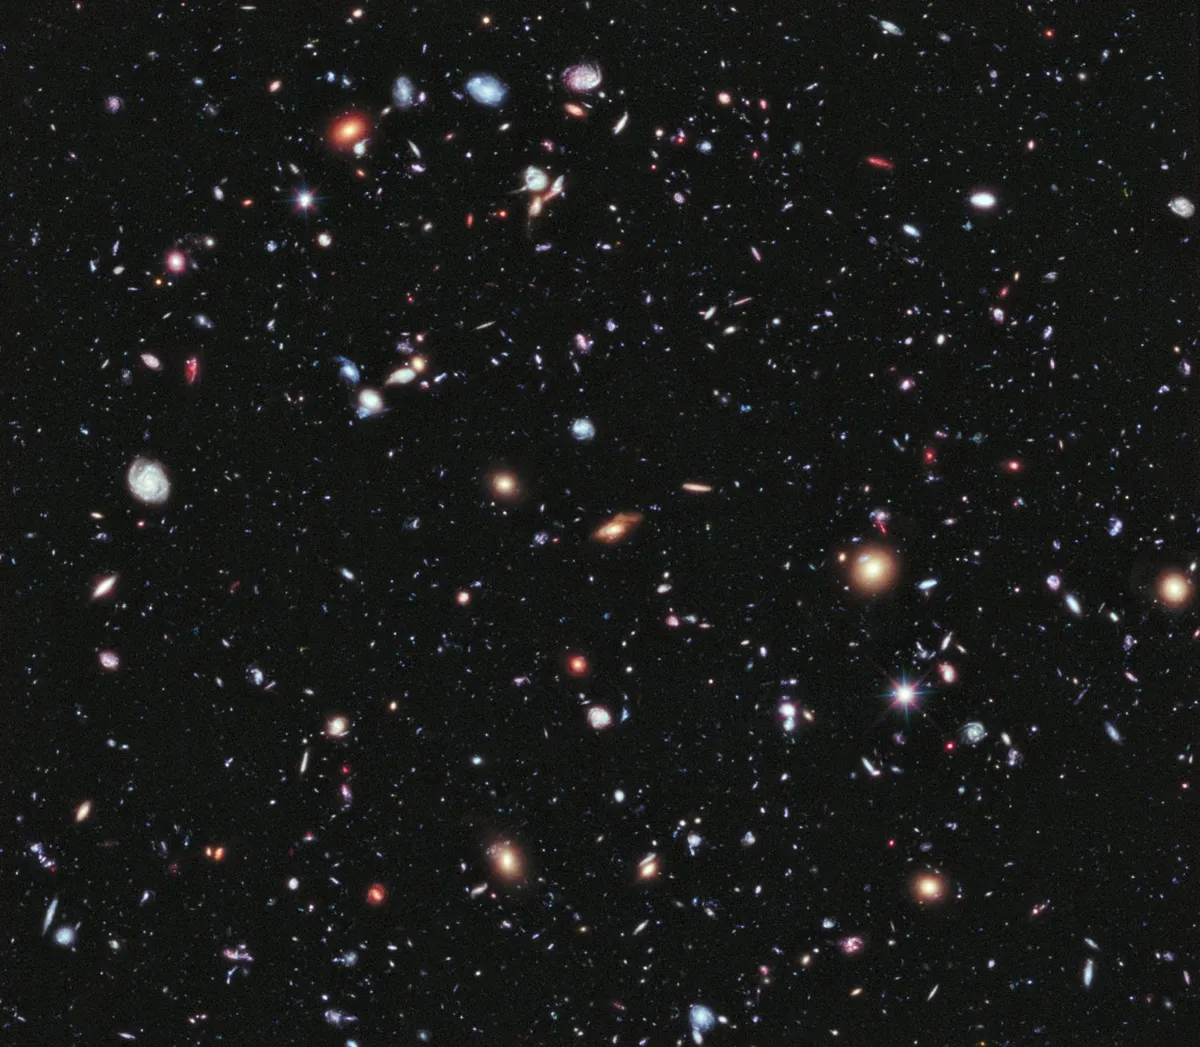 The Universe is expanding, even if it's infinite